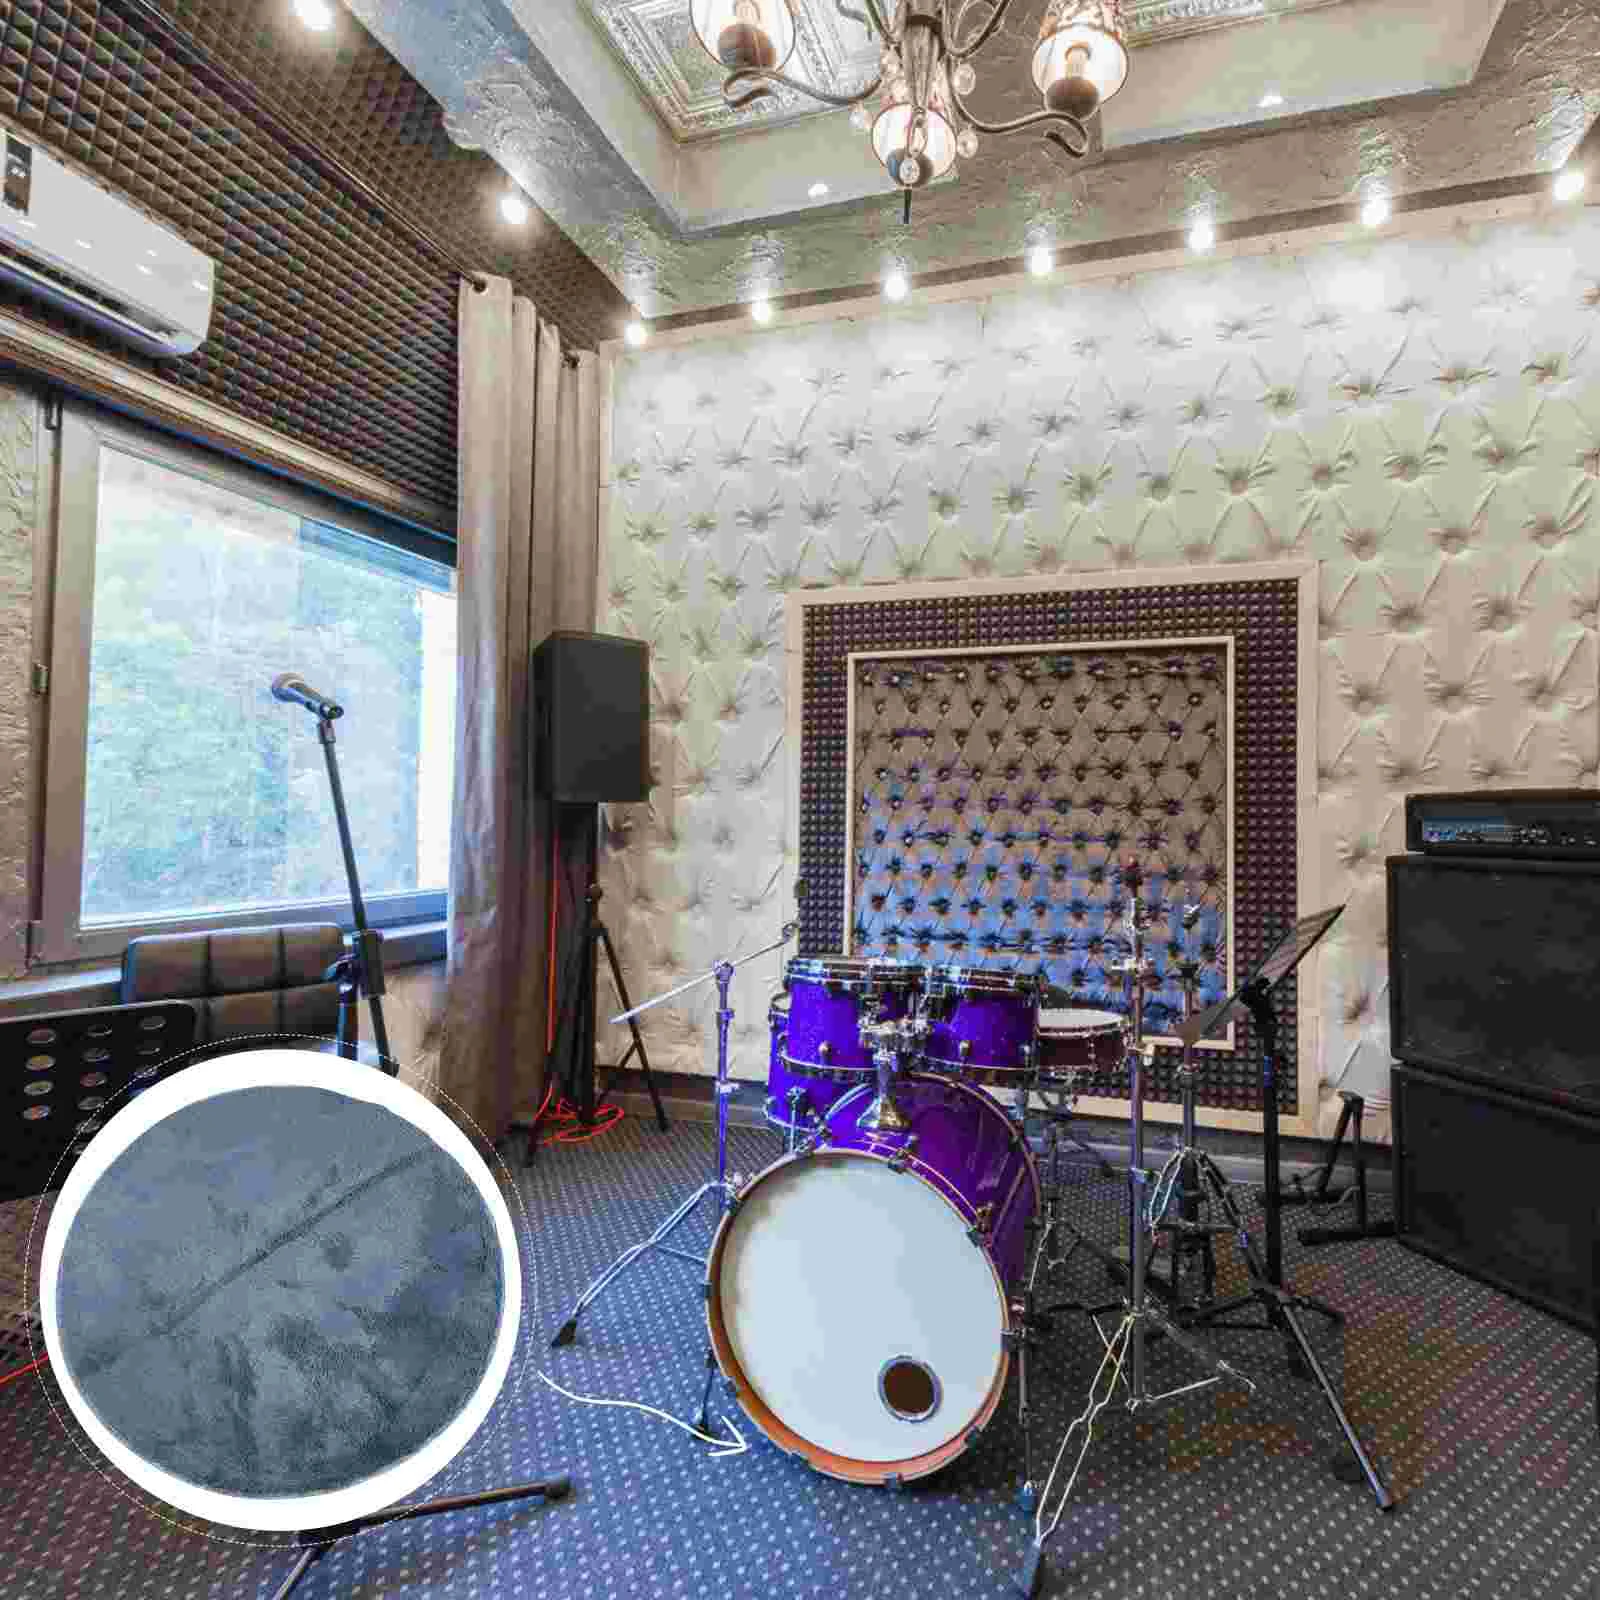 

Drum Rug Mat Sound Pad Floor Noise Carpet Skid Anti Cushion Isolation Absorbing Soundproof Reduction Non Panels Area Jazz